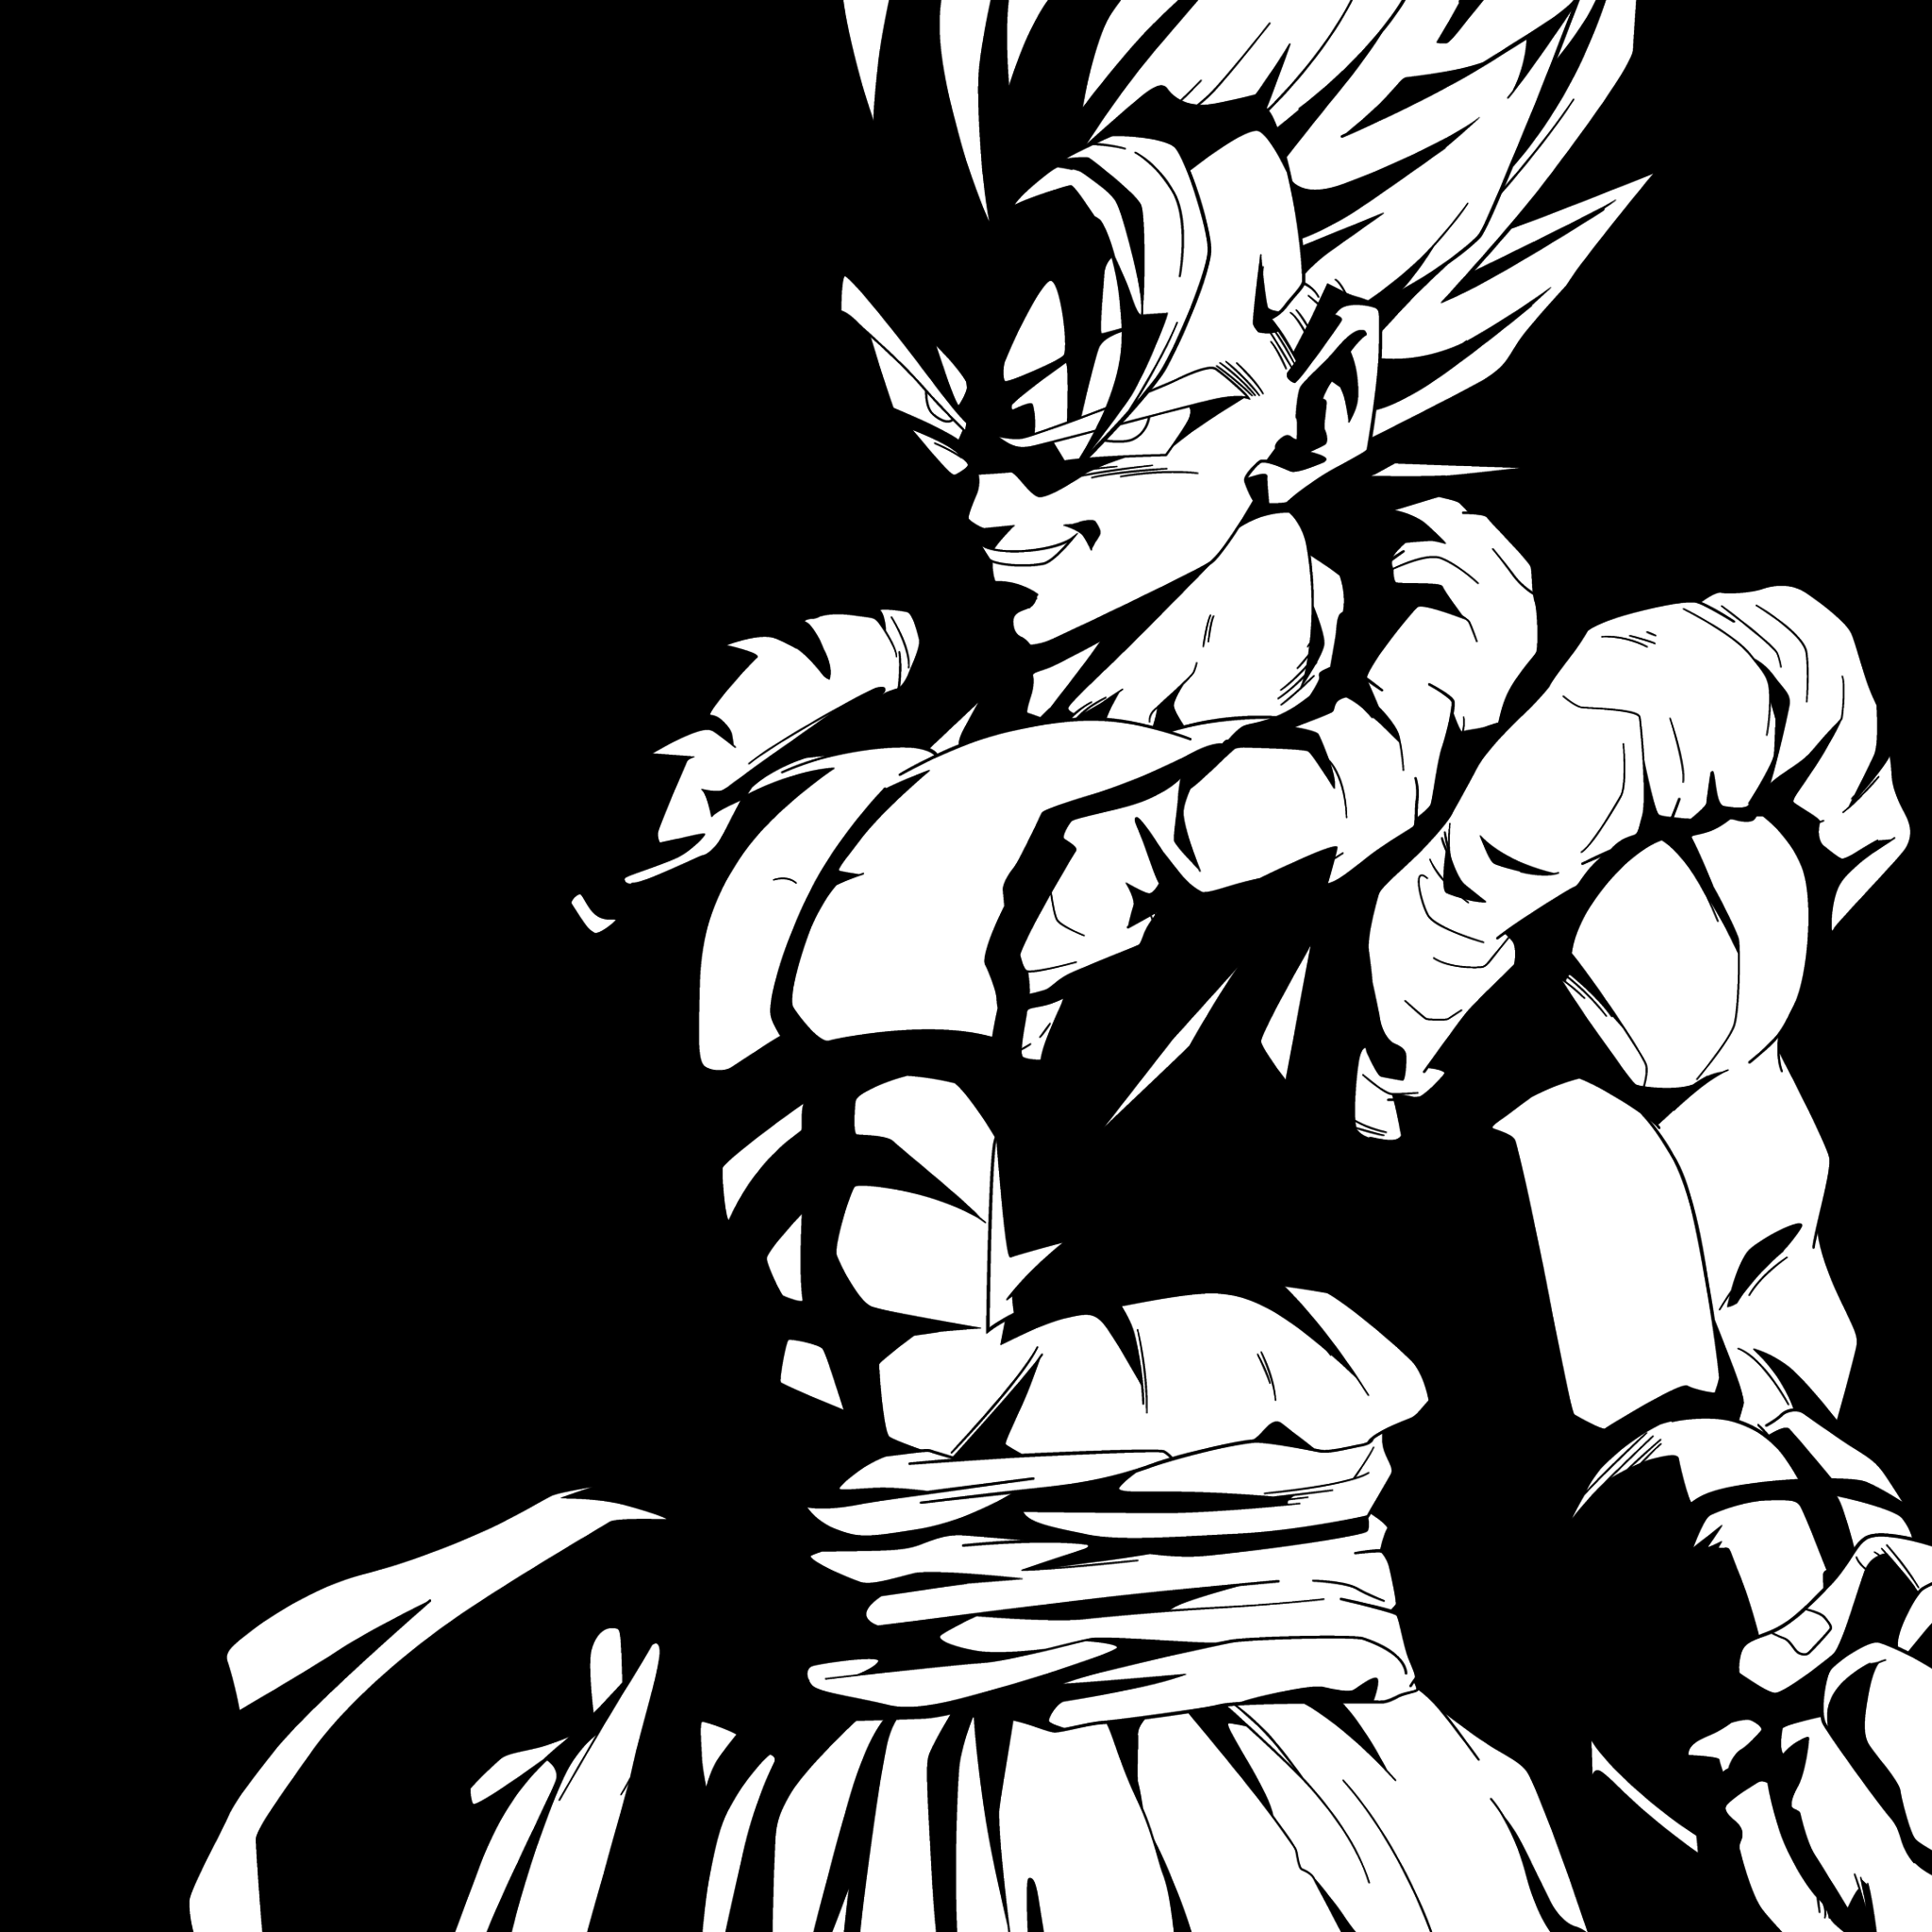 Download Dbz Mobile Wallpapers Gallery.